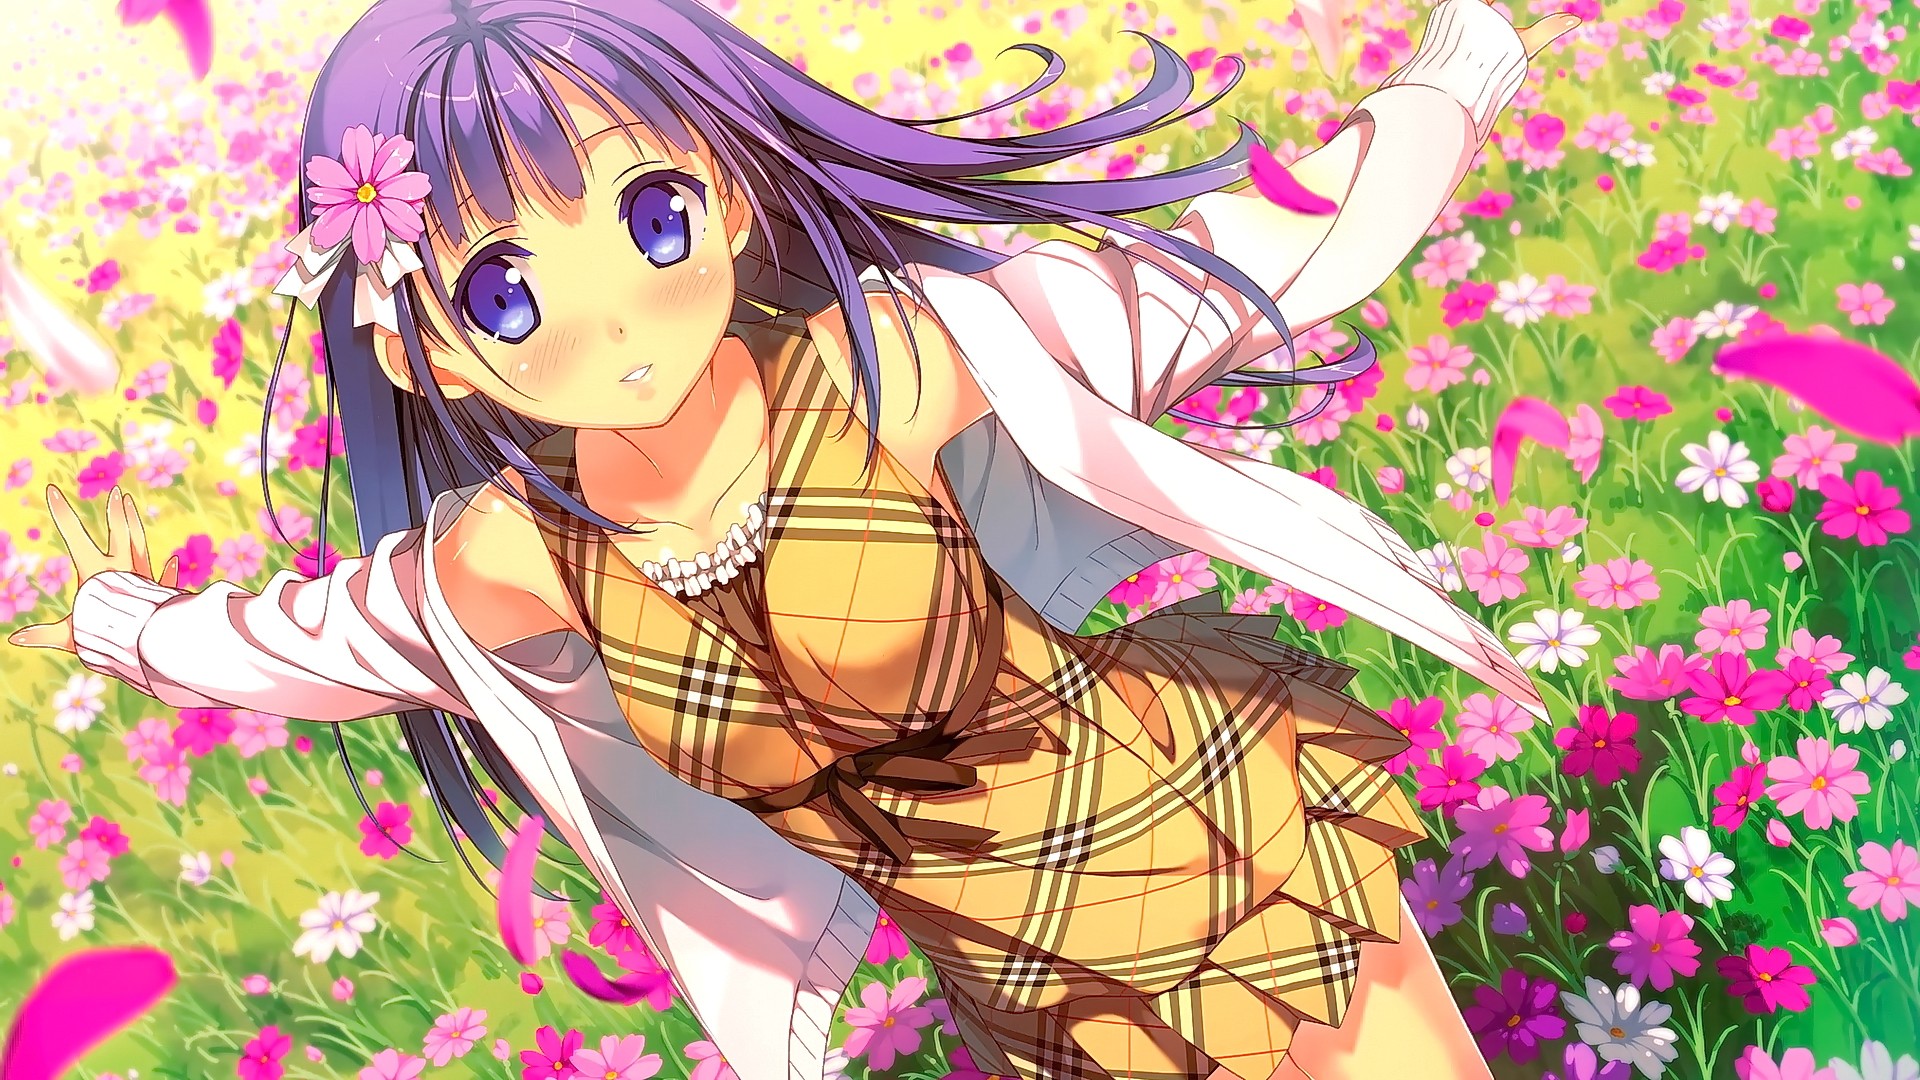 Anime Anime Girls Kantoku Flowers Field Hair Ornament Afterschool Of The 5th Year Original Character 1920x1080